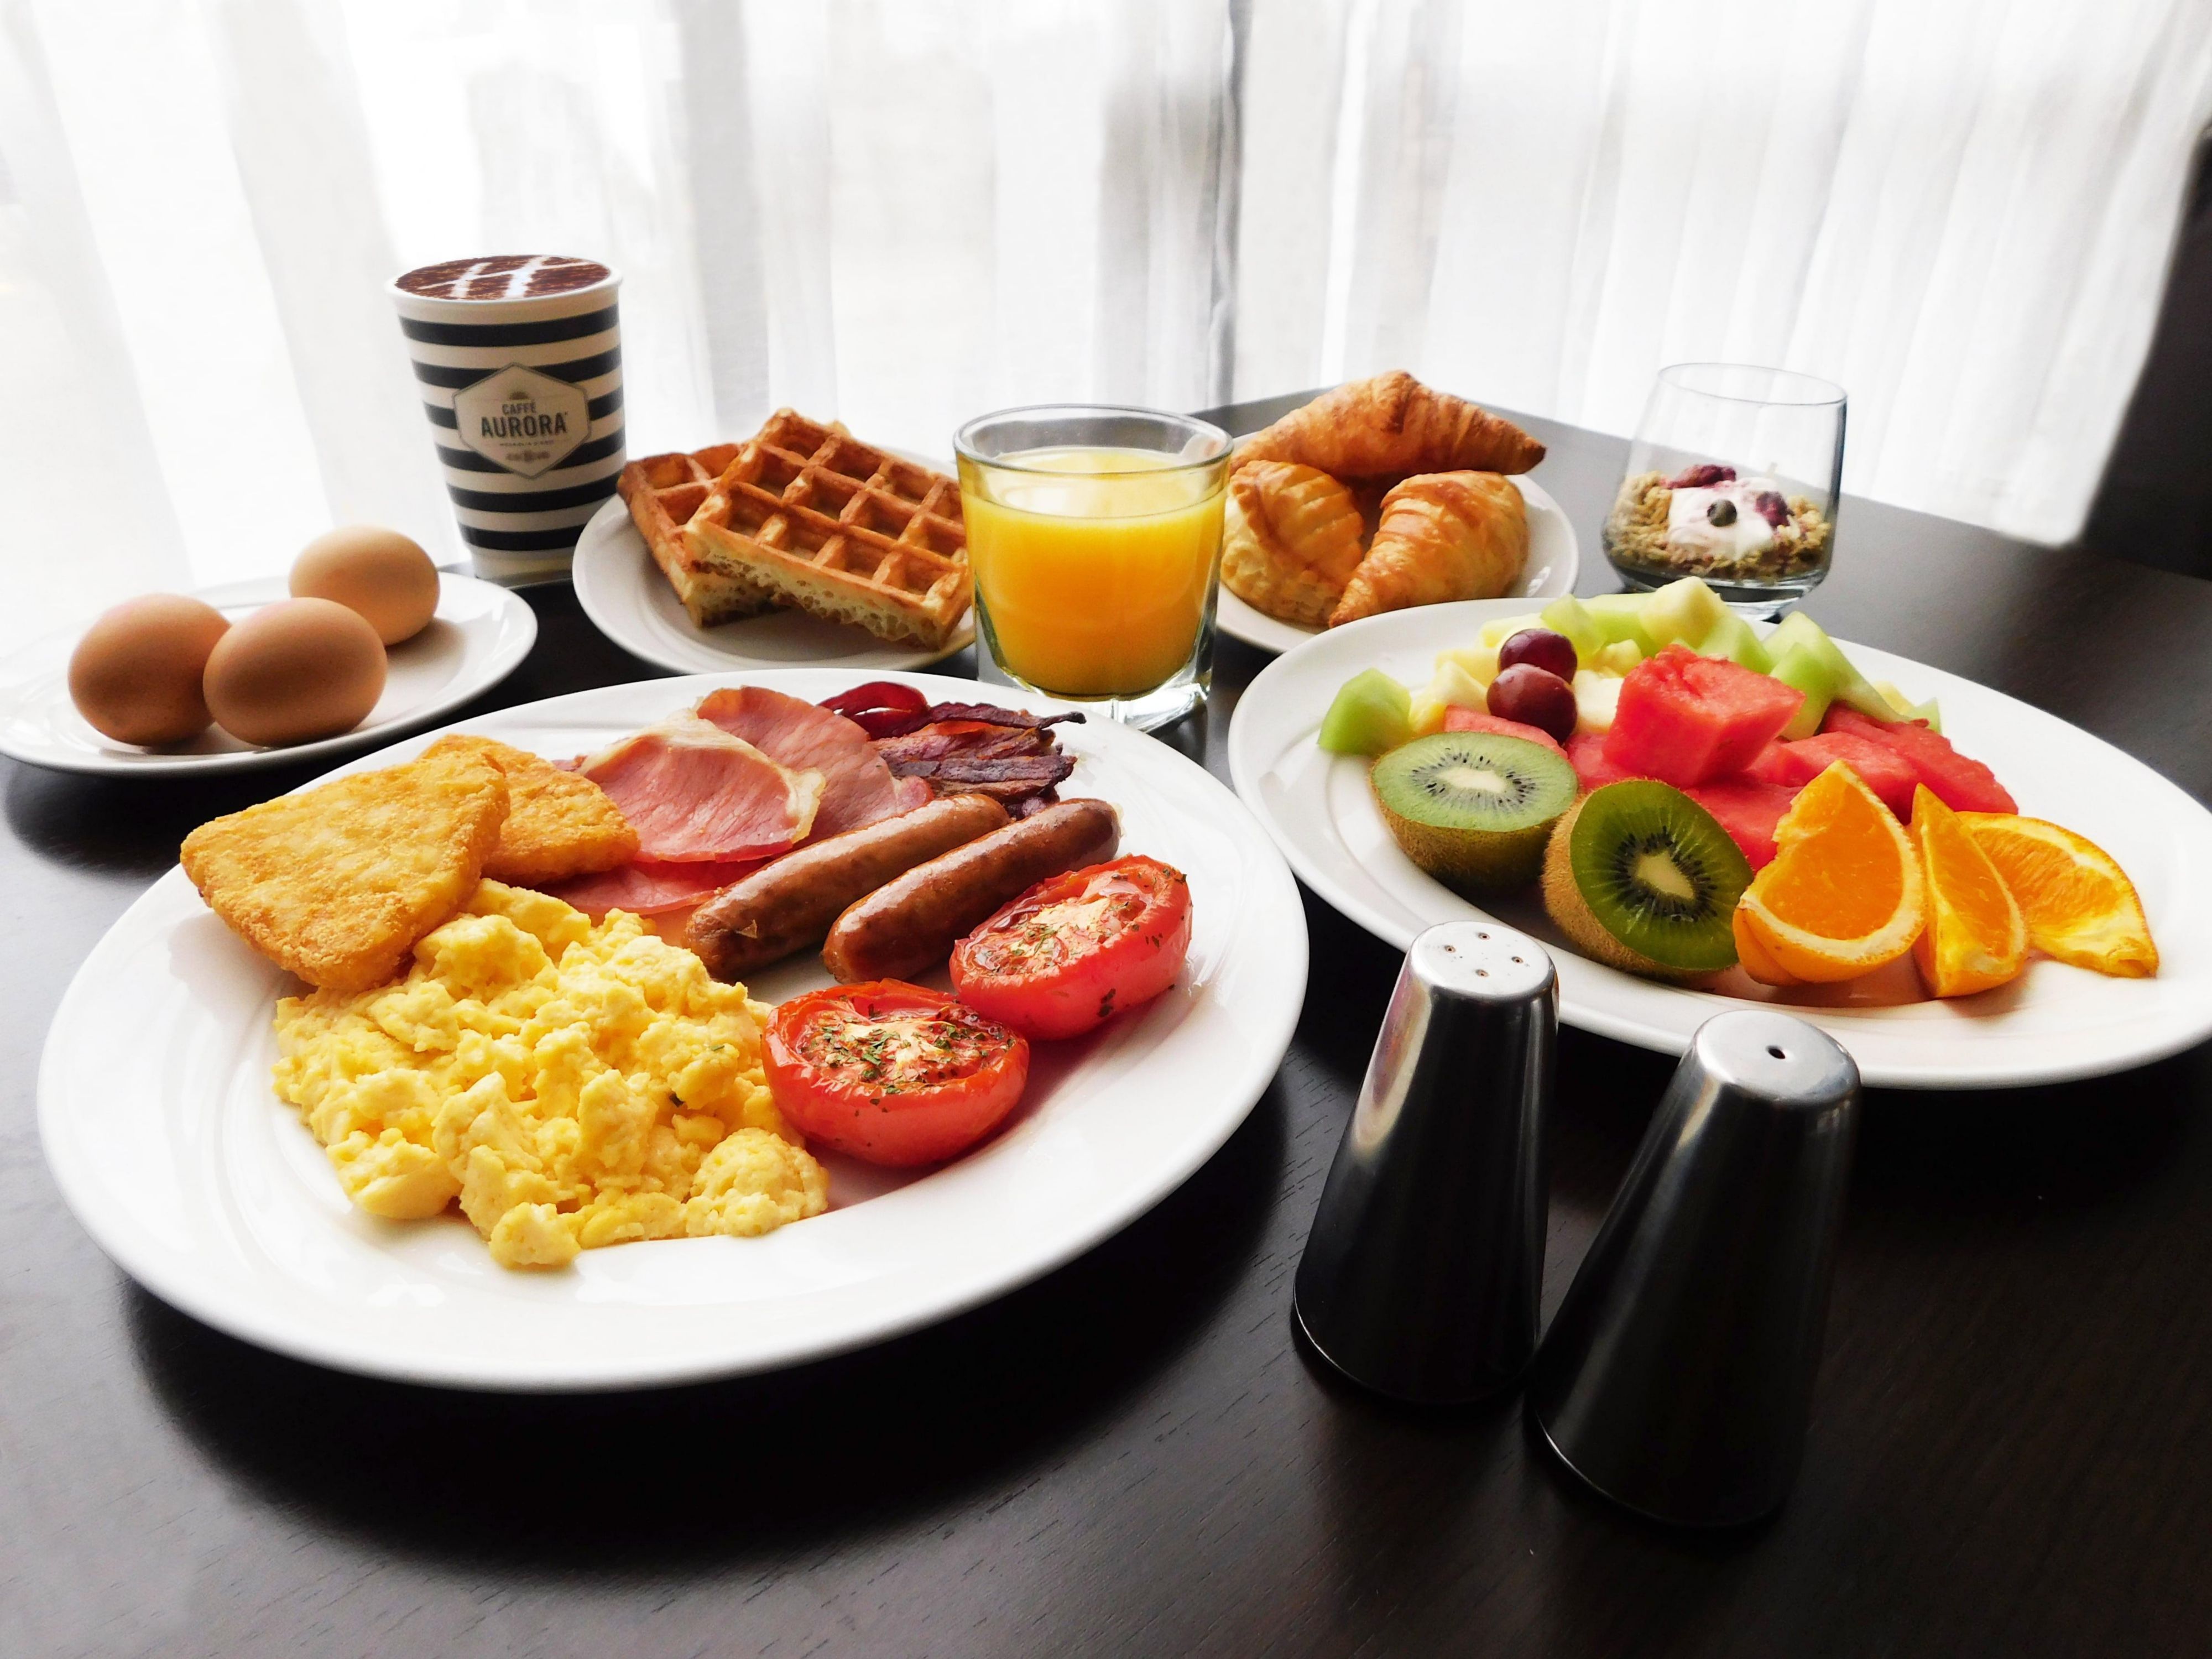 A little bit of this, a little bit of that... Enjoy breakfast your way with Holiday Inn Parramatta's full buffet breakfast! Kids 12 and under eat free when dining with a paying adult staying in the hotel, to help you save on the basics, and to satisfy even the pickiest of eaters! 